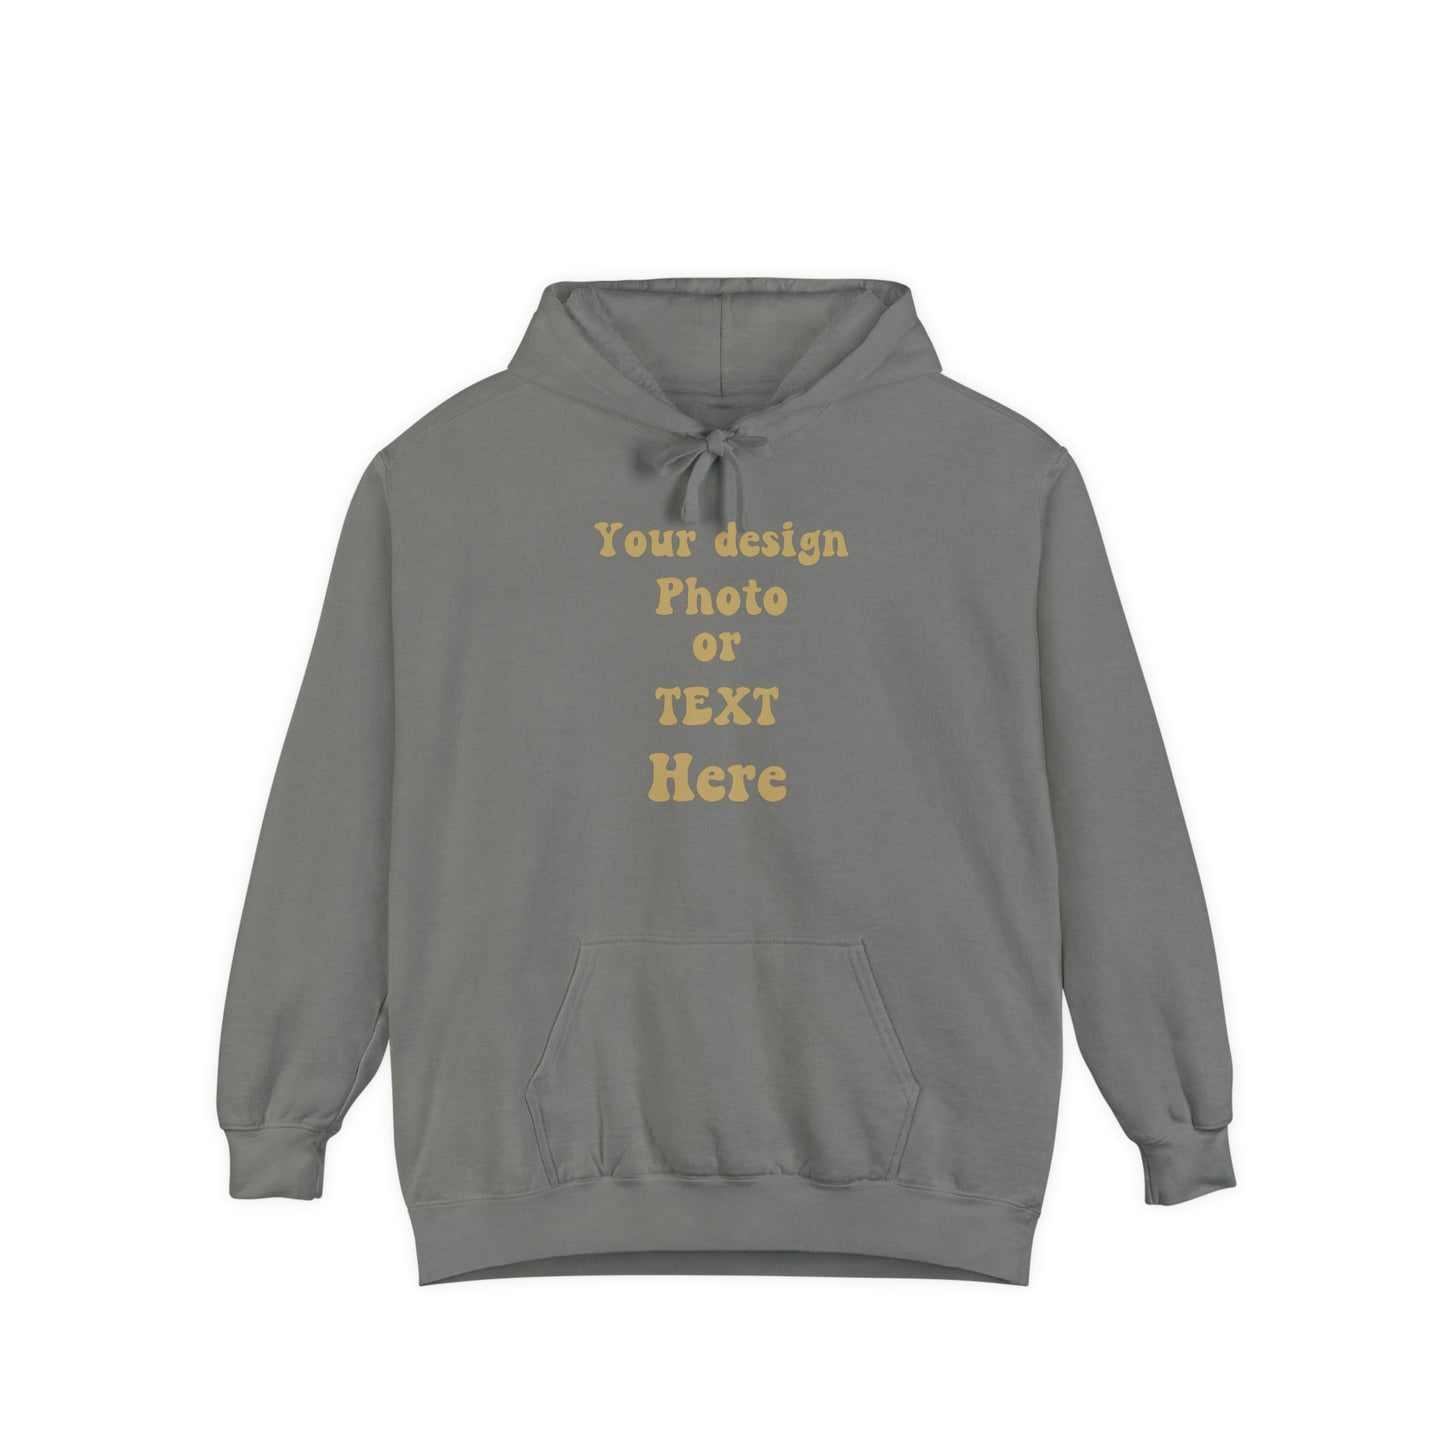 Luxury Hoodie - Personalize with Your Design, Photo, or Text | Greatest Comfort Hoodie Grey S 